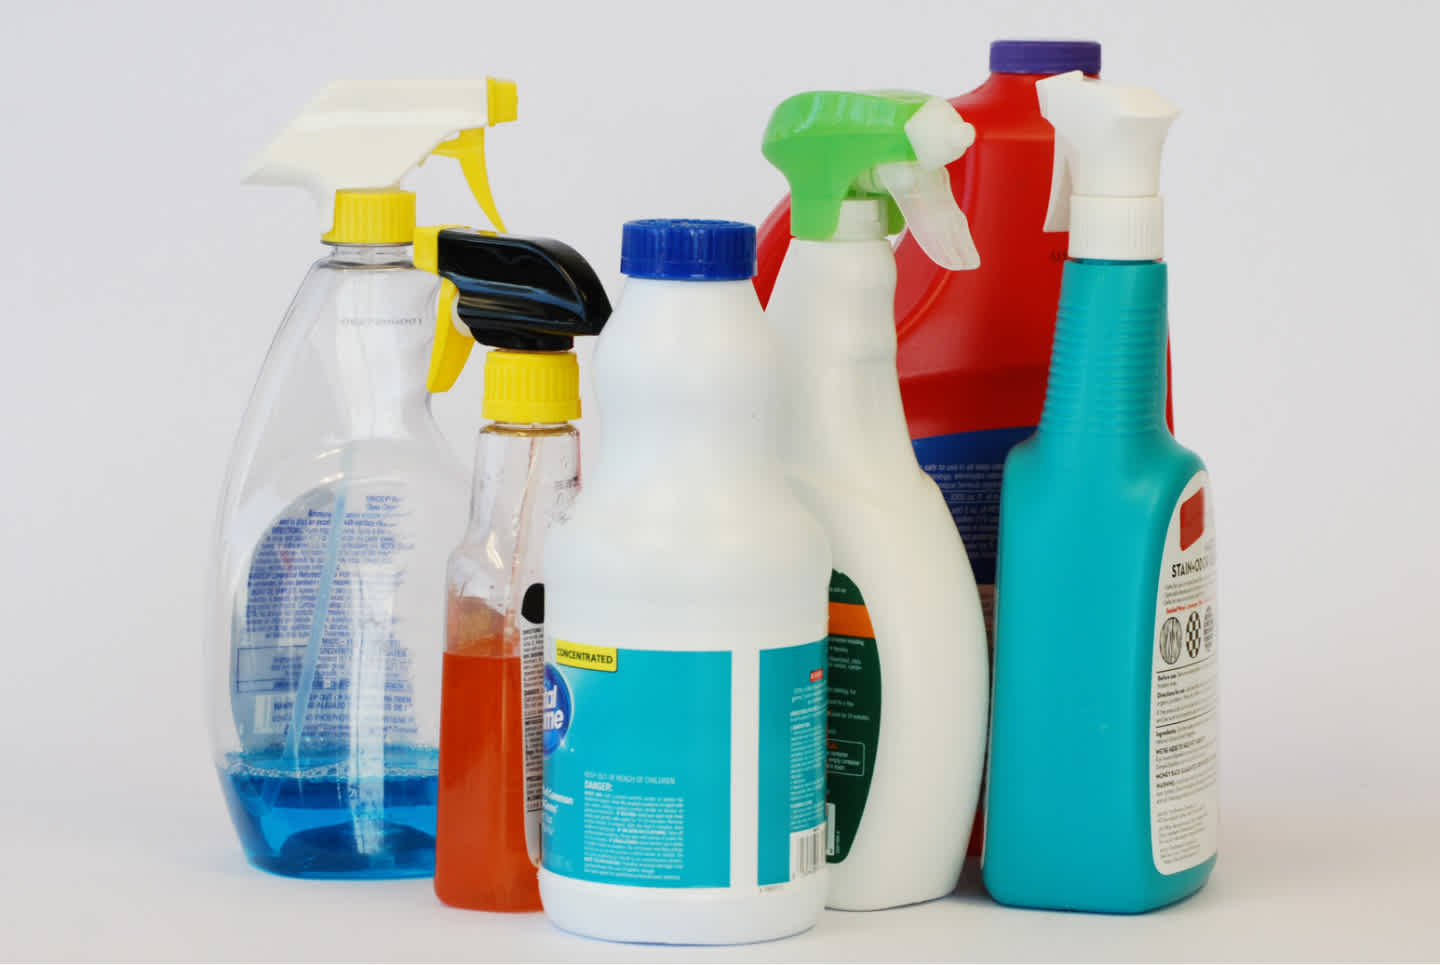 Disposal of Household Cleaning Products